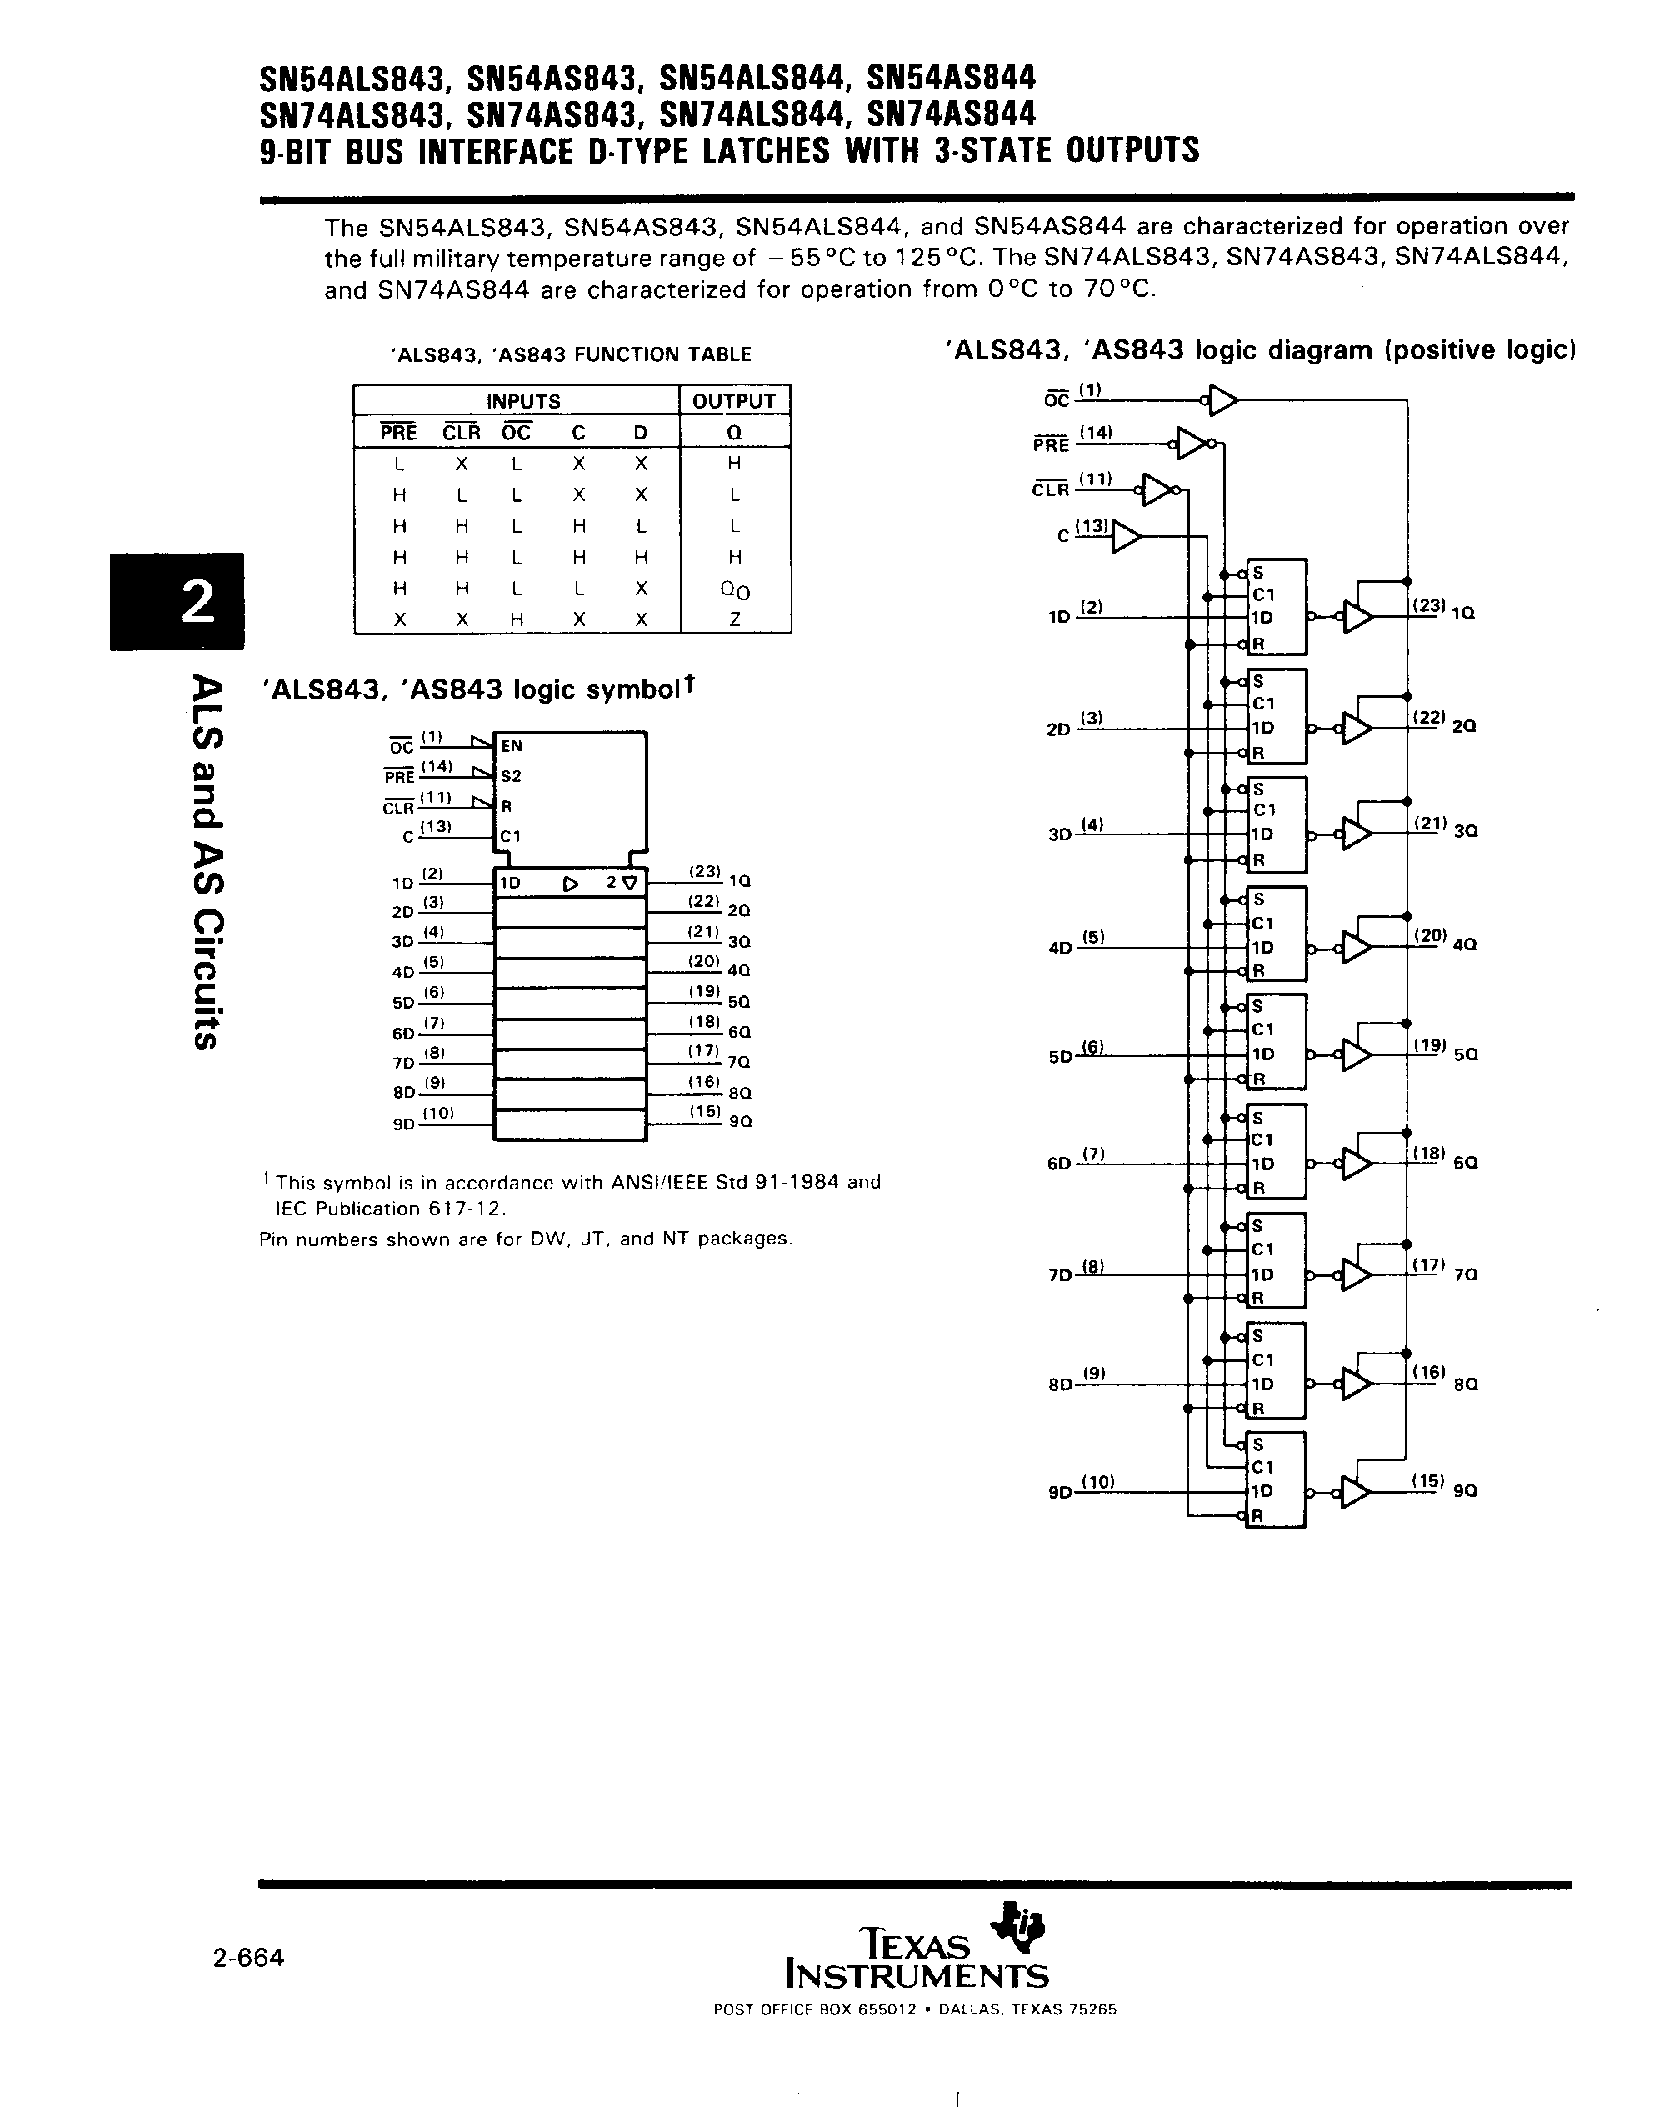 Datasheet SN74AS844 - (SN74AS843) 9 Bit Bus Interface D-Type Latches with 3 State Outputs page 2